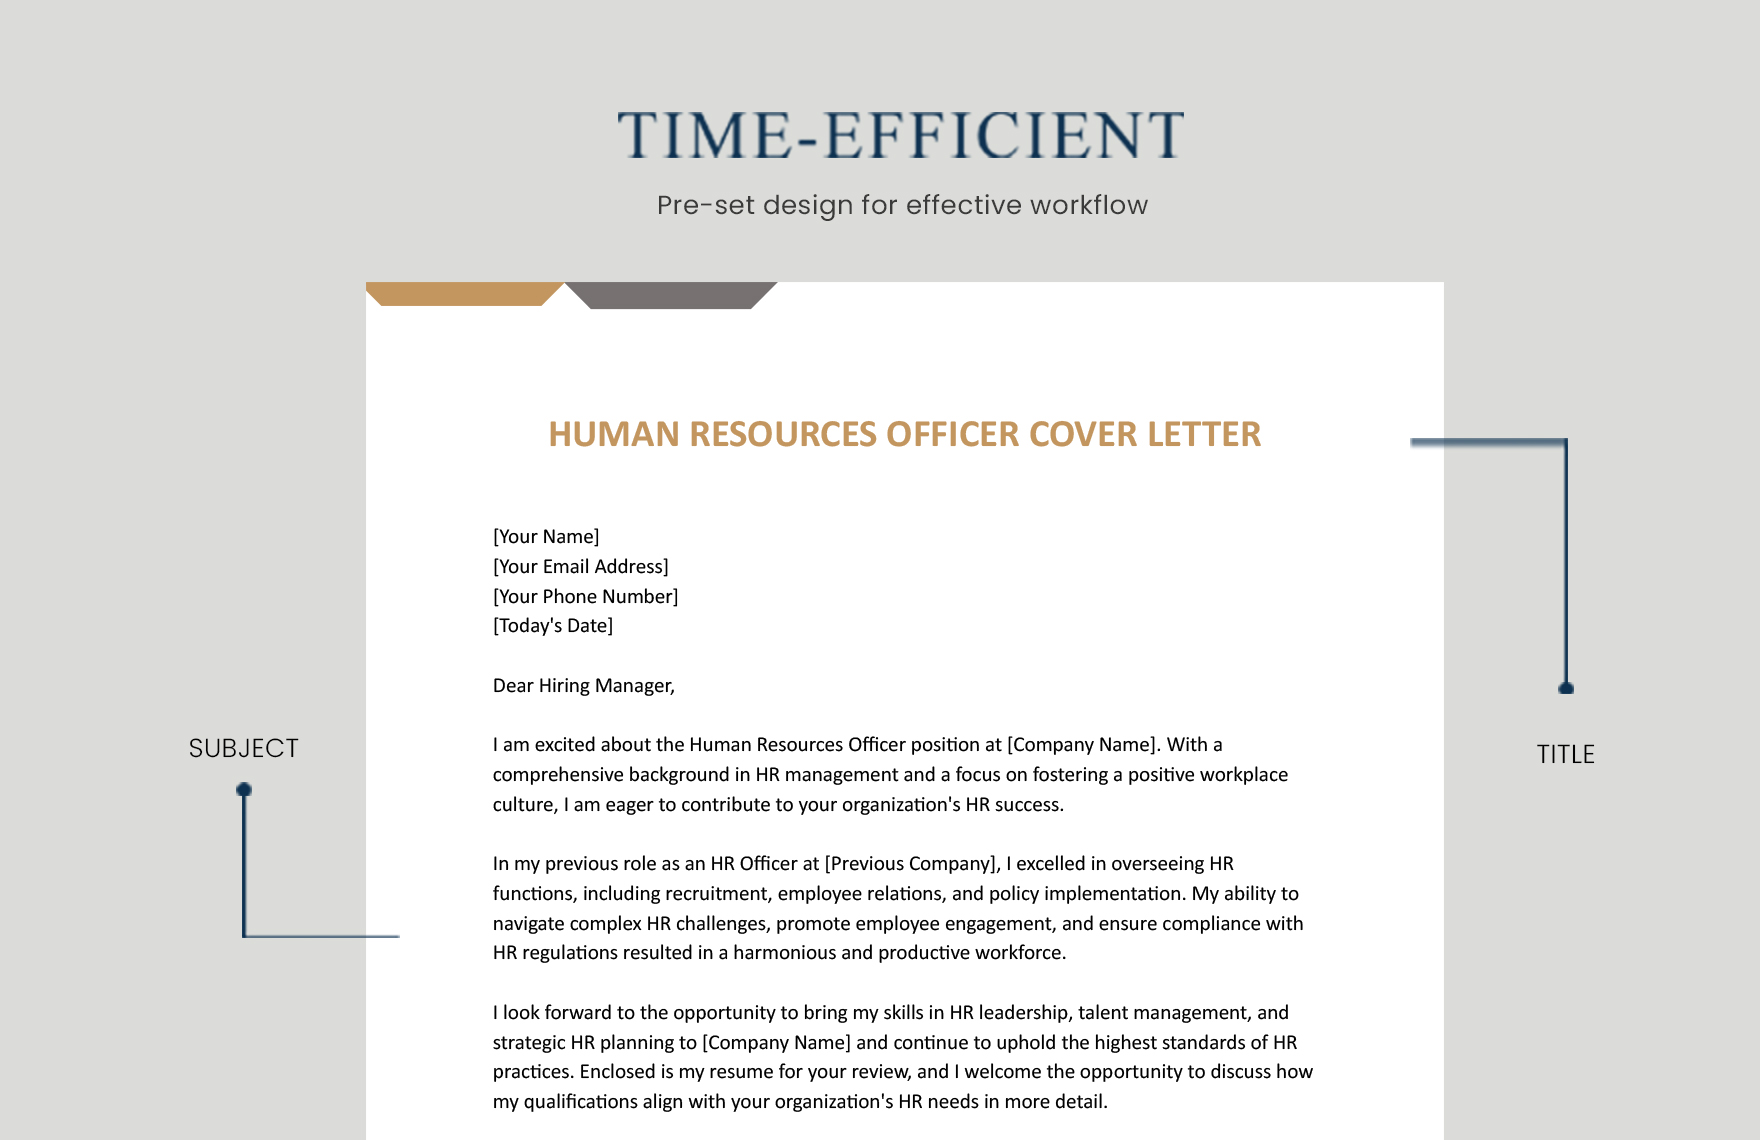 Human Resources Officer Cover Letter